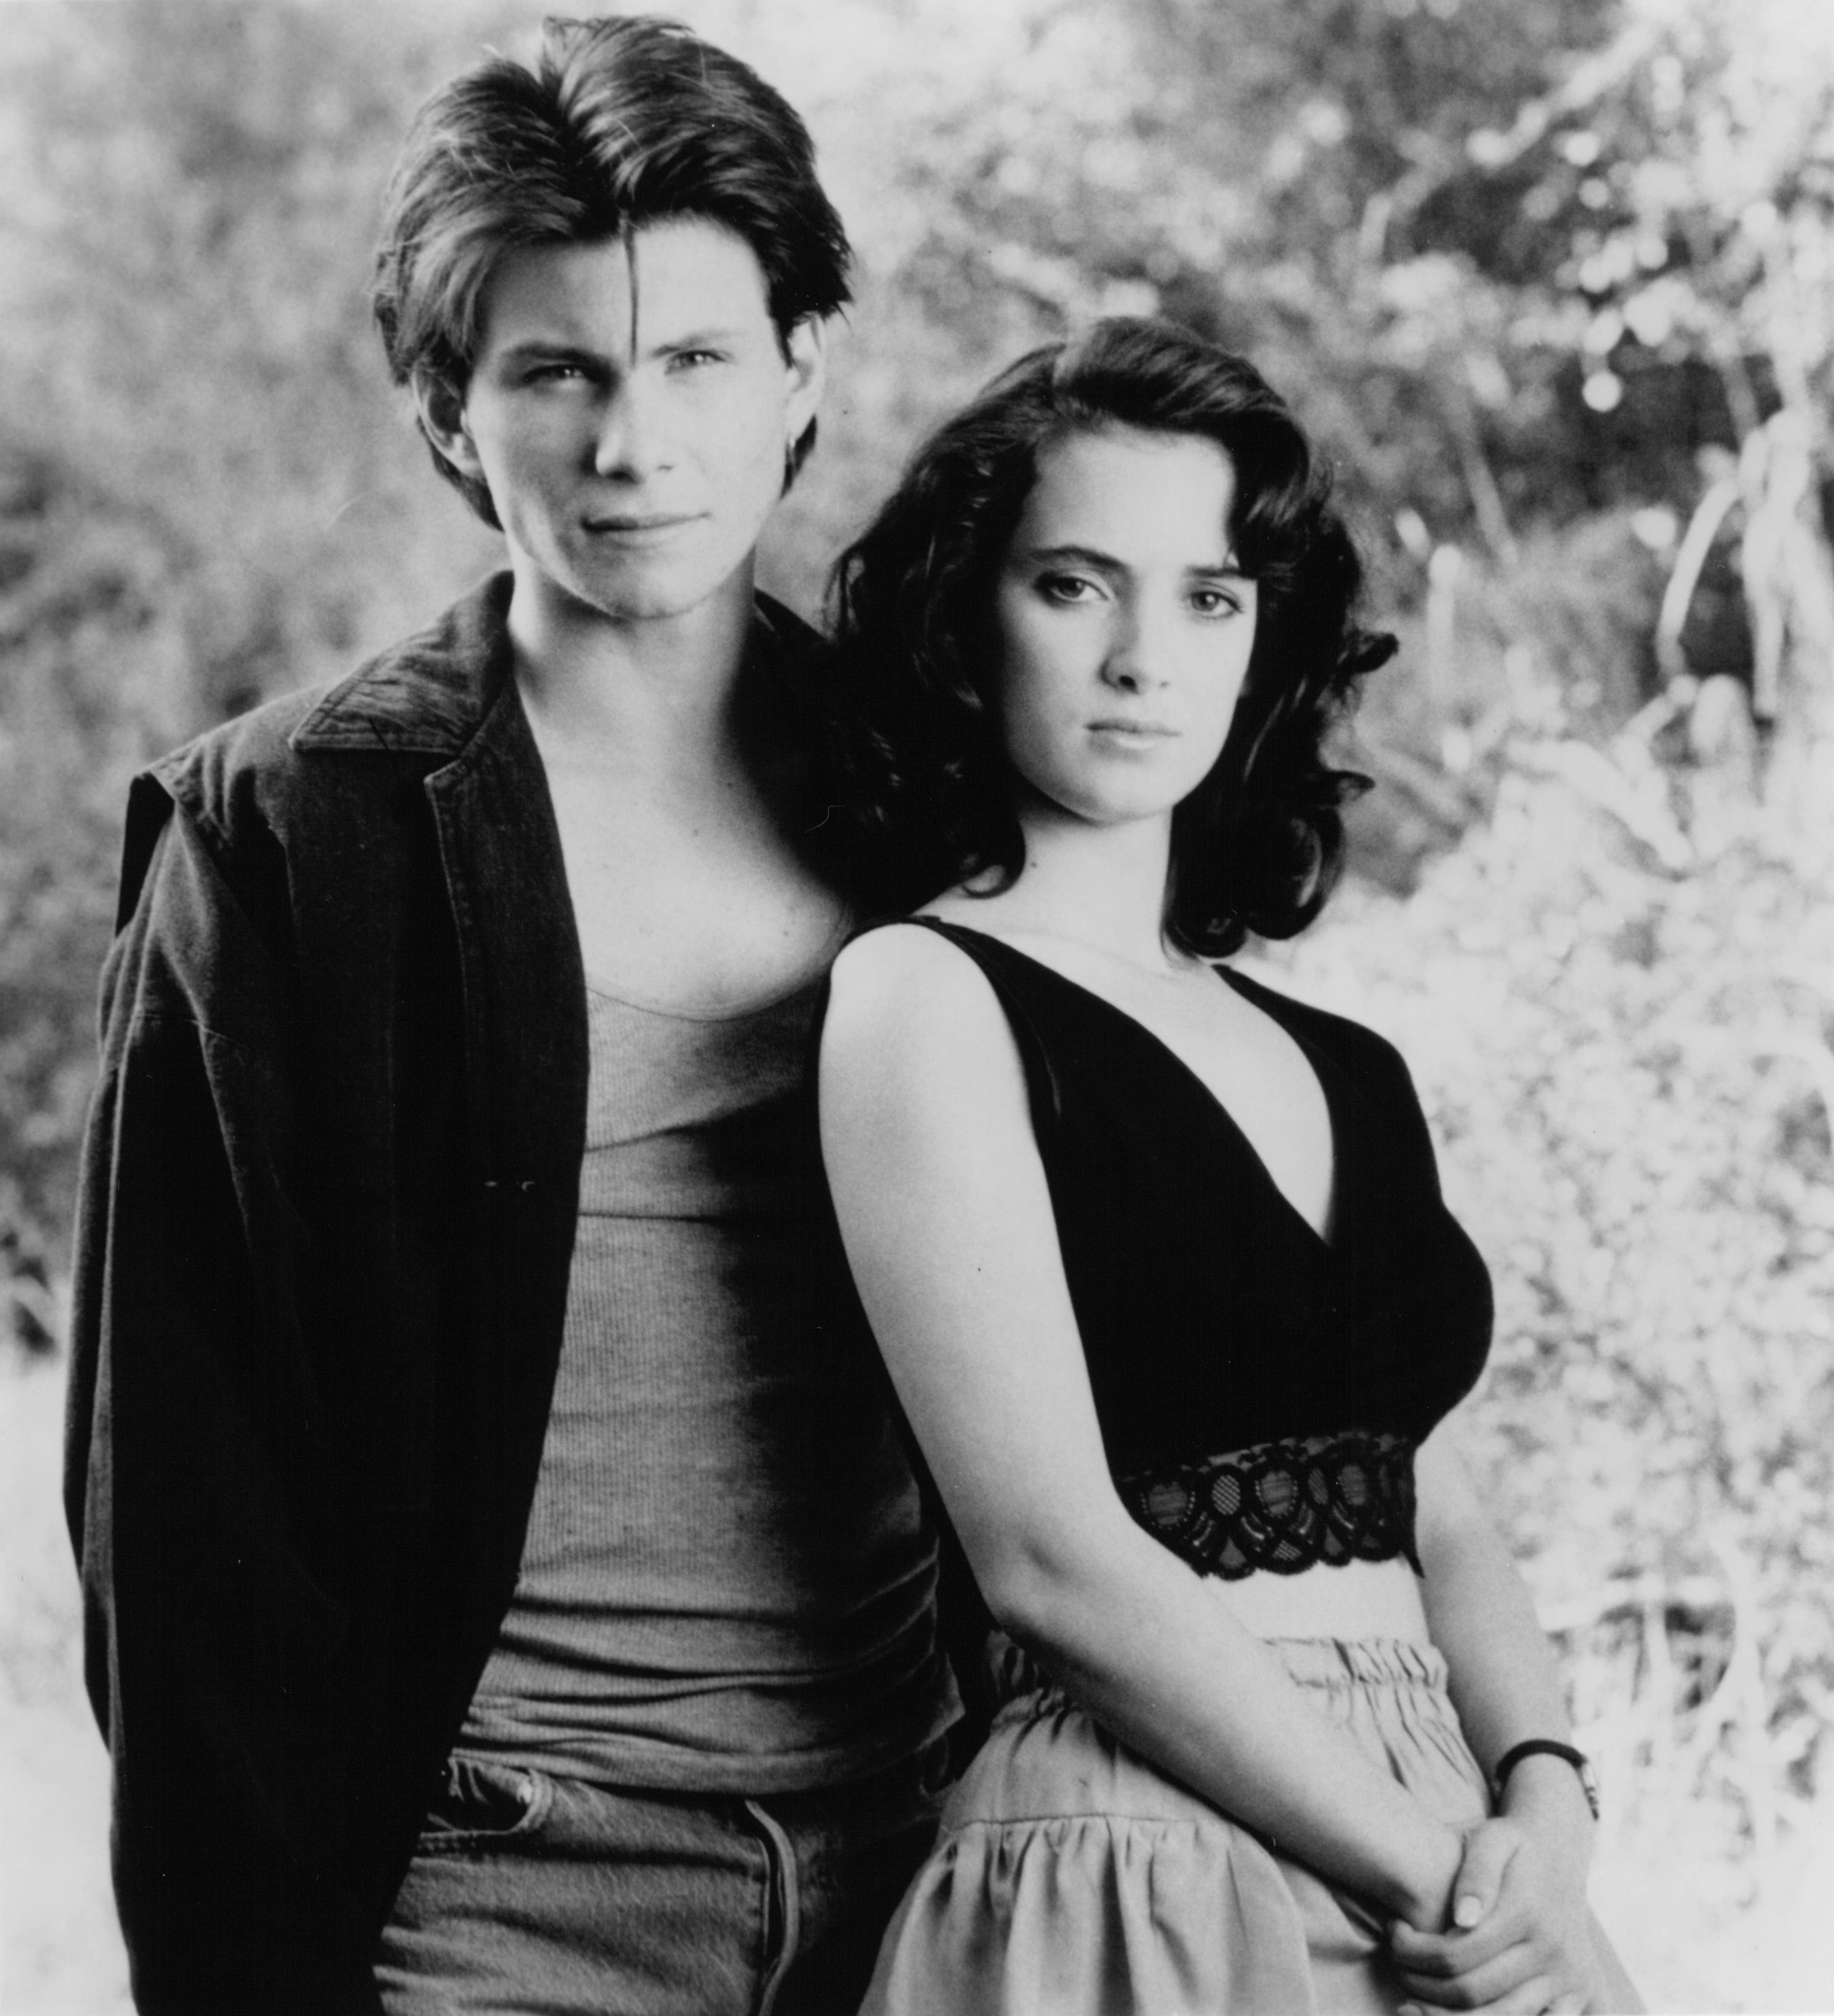 Still of Winona Ryder and Christian Slater in Heathers (1988)